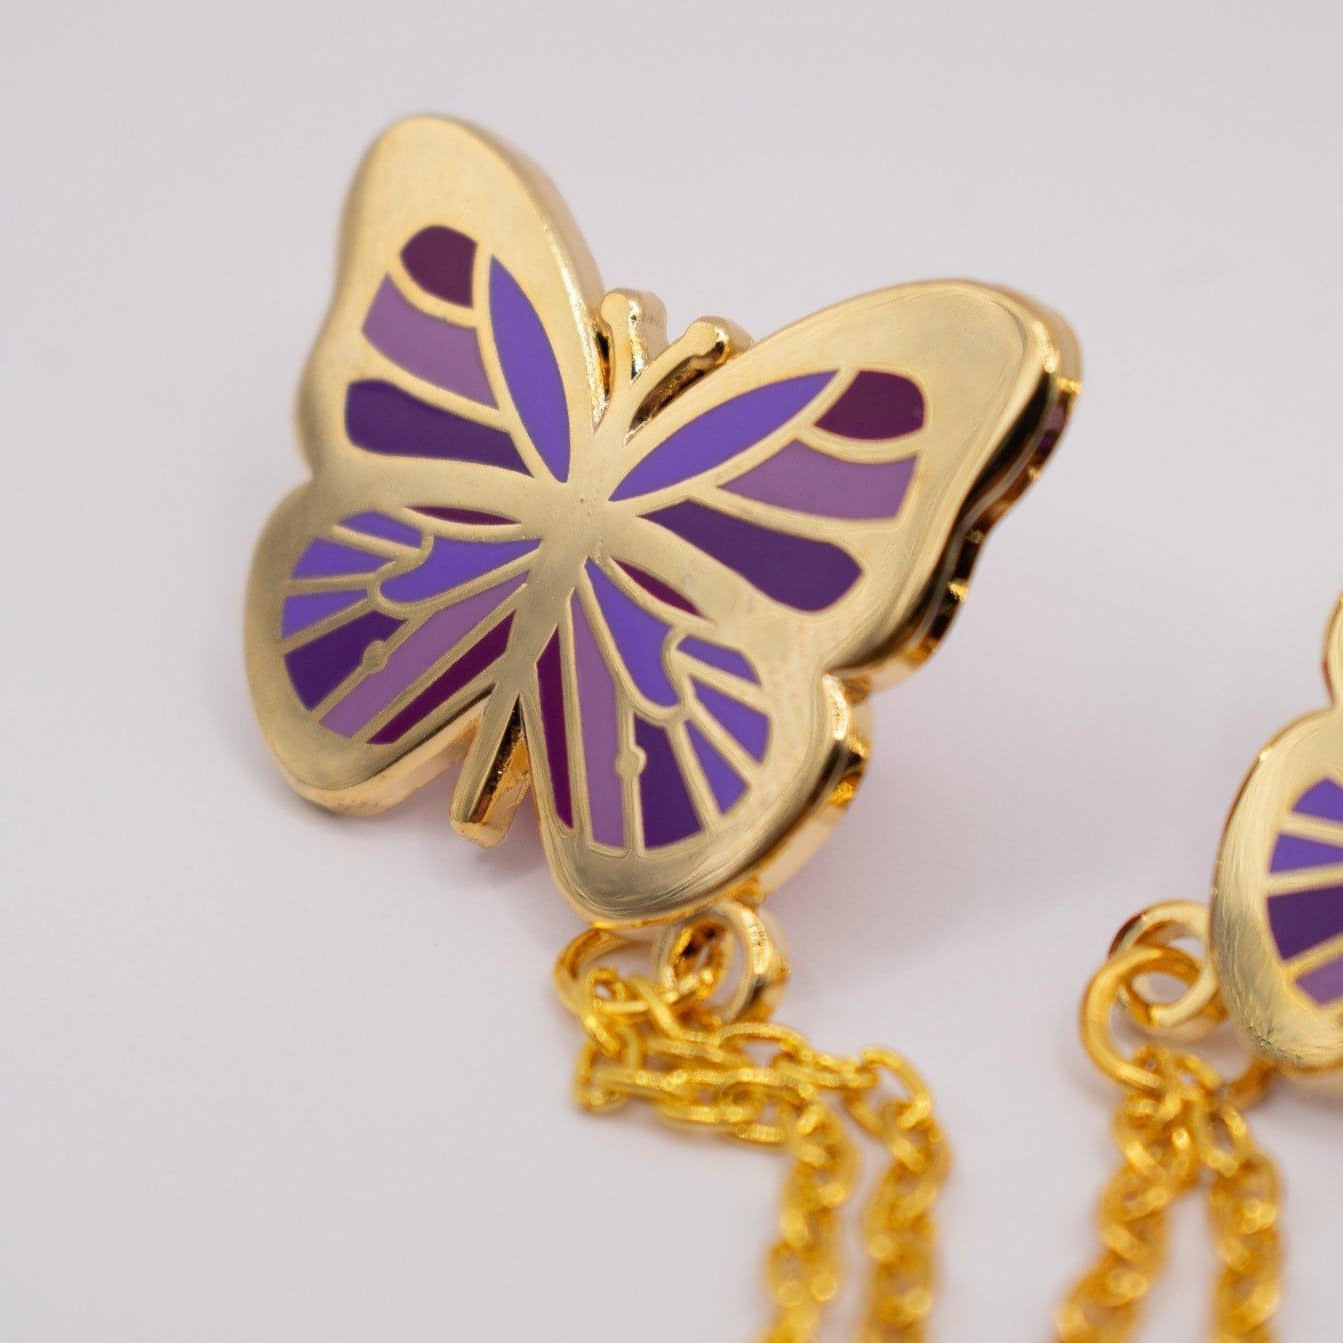 Pictured is a close up shot of one of the purple butterlies and the chain attaching it to the other butterfly. The butterfly wings contain various shades of purple, the outside metal is a shiny gold, and the chain is also gold.